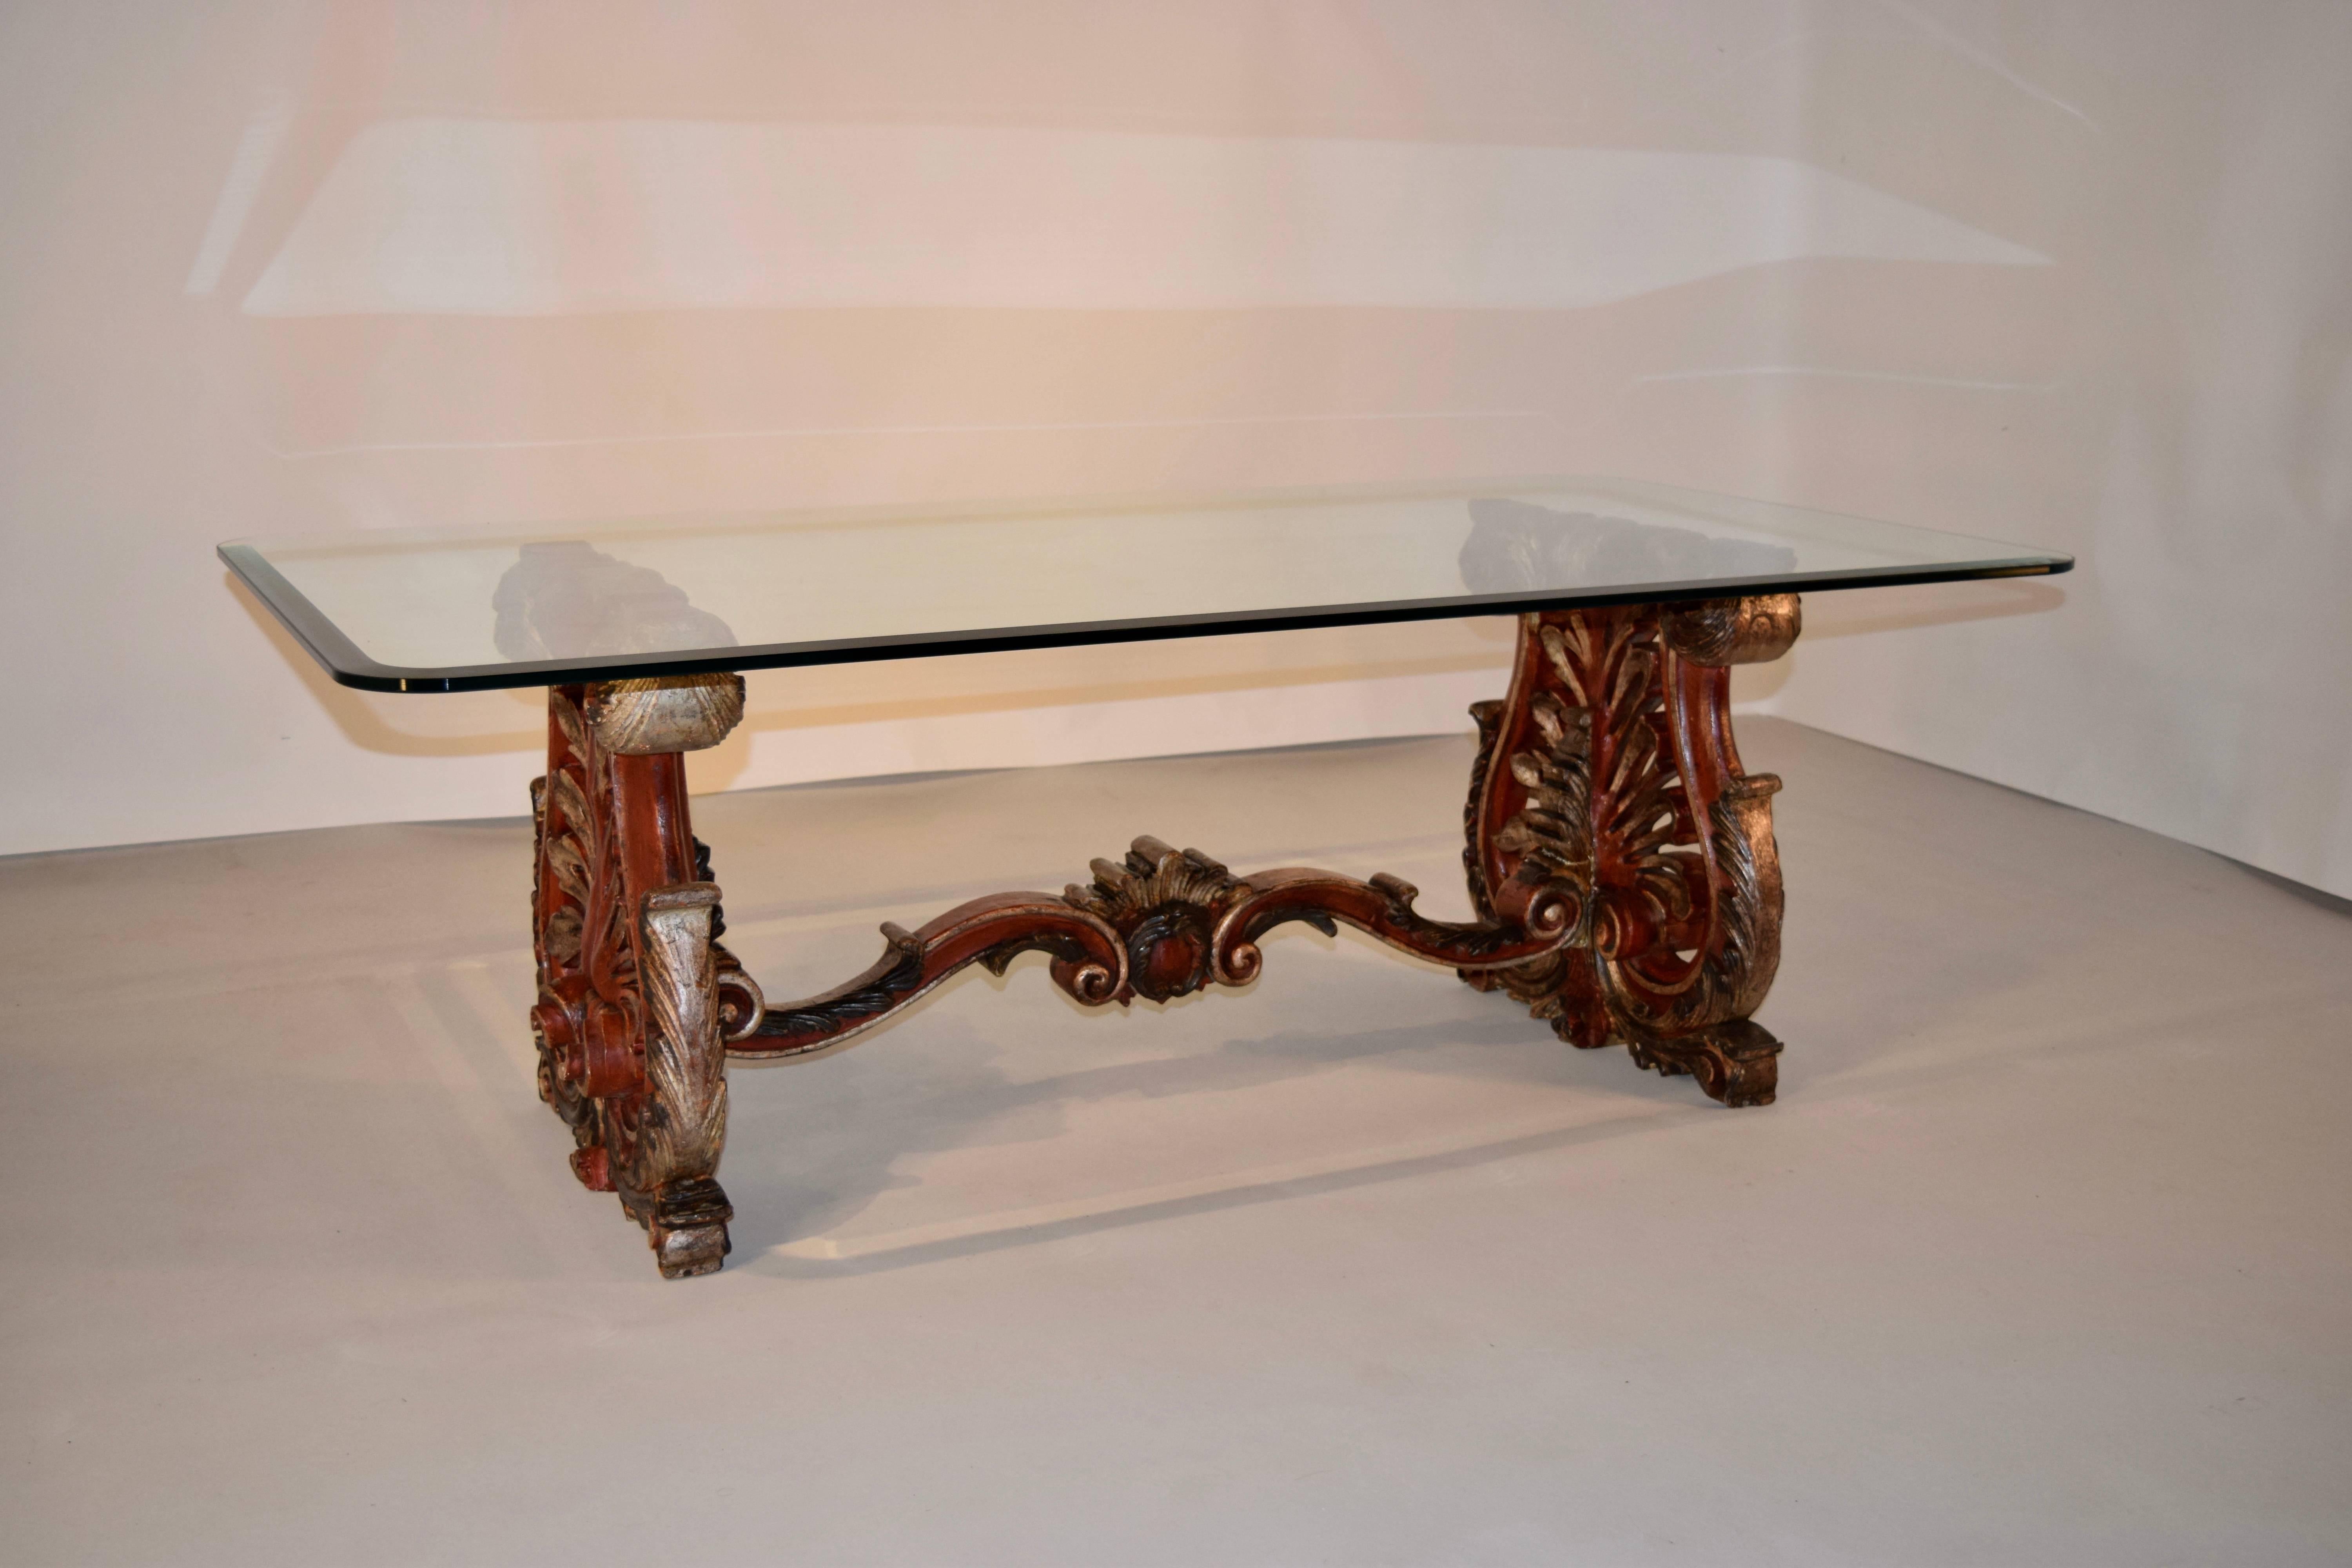 19th century hand-carved and painted wooden coffee table from Italy. The end supports are trestle shaped and are finely carved with acanthus leaves and pierced decoration over a carved scroll foot. The top is glass, and has a beveled edge and